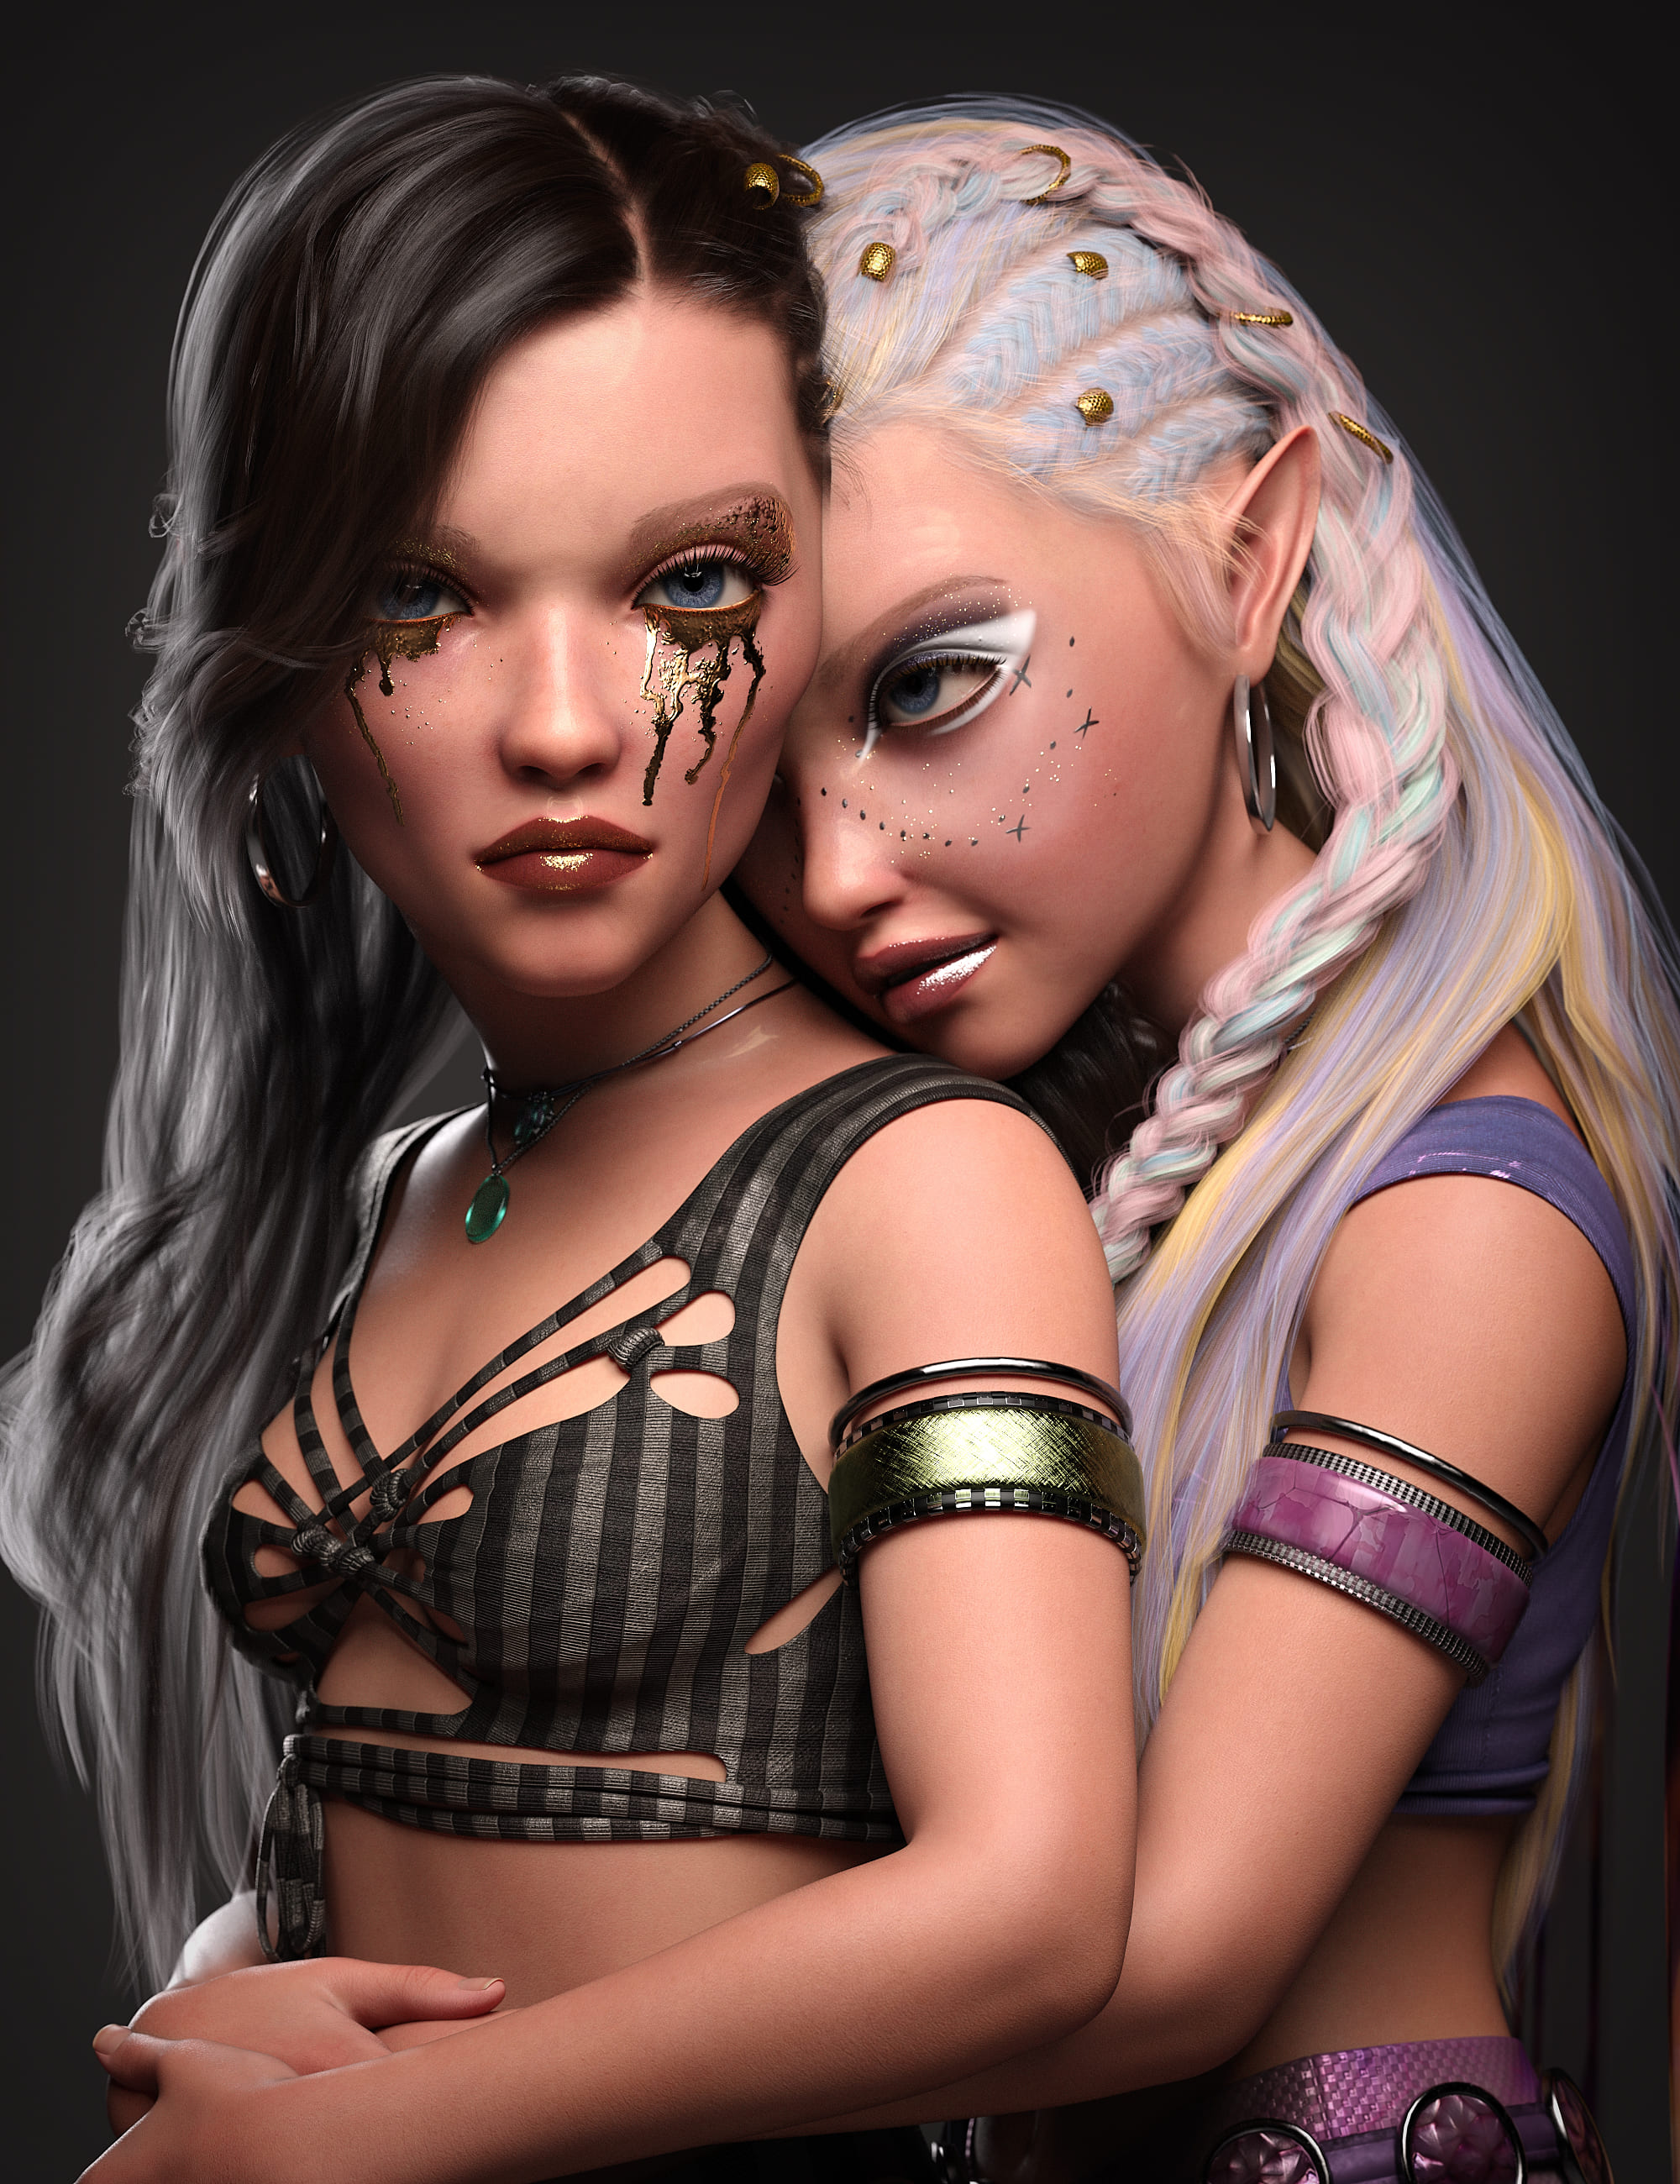 Head Shapes and Makeup for Pixie 9_DAZ3D下载站